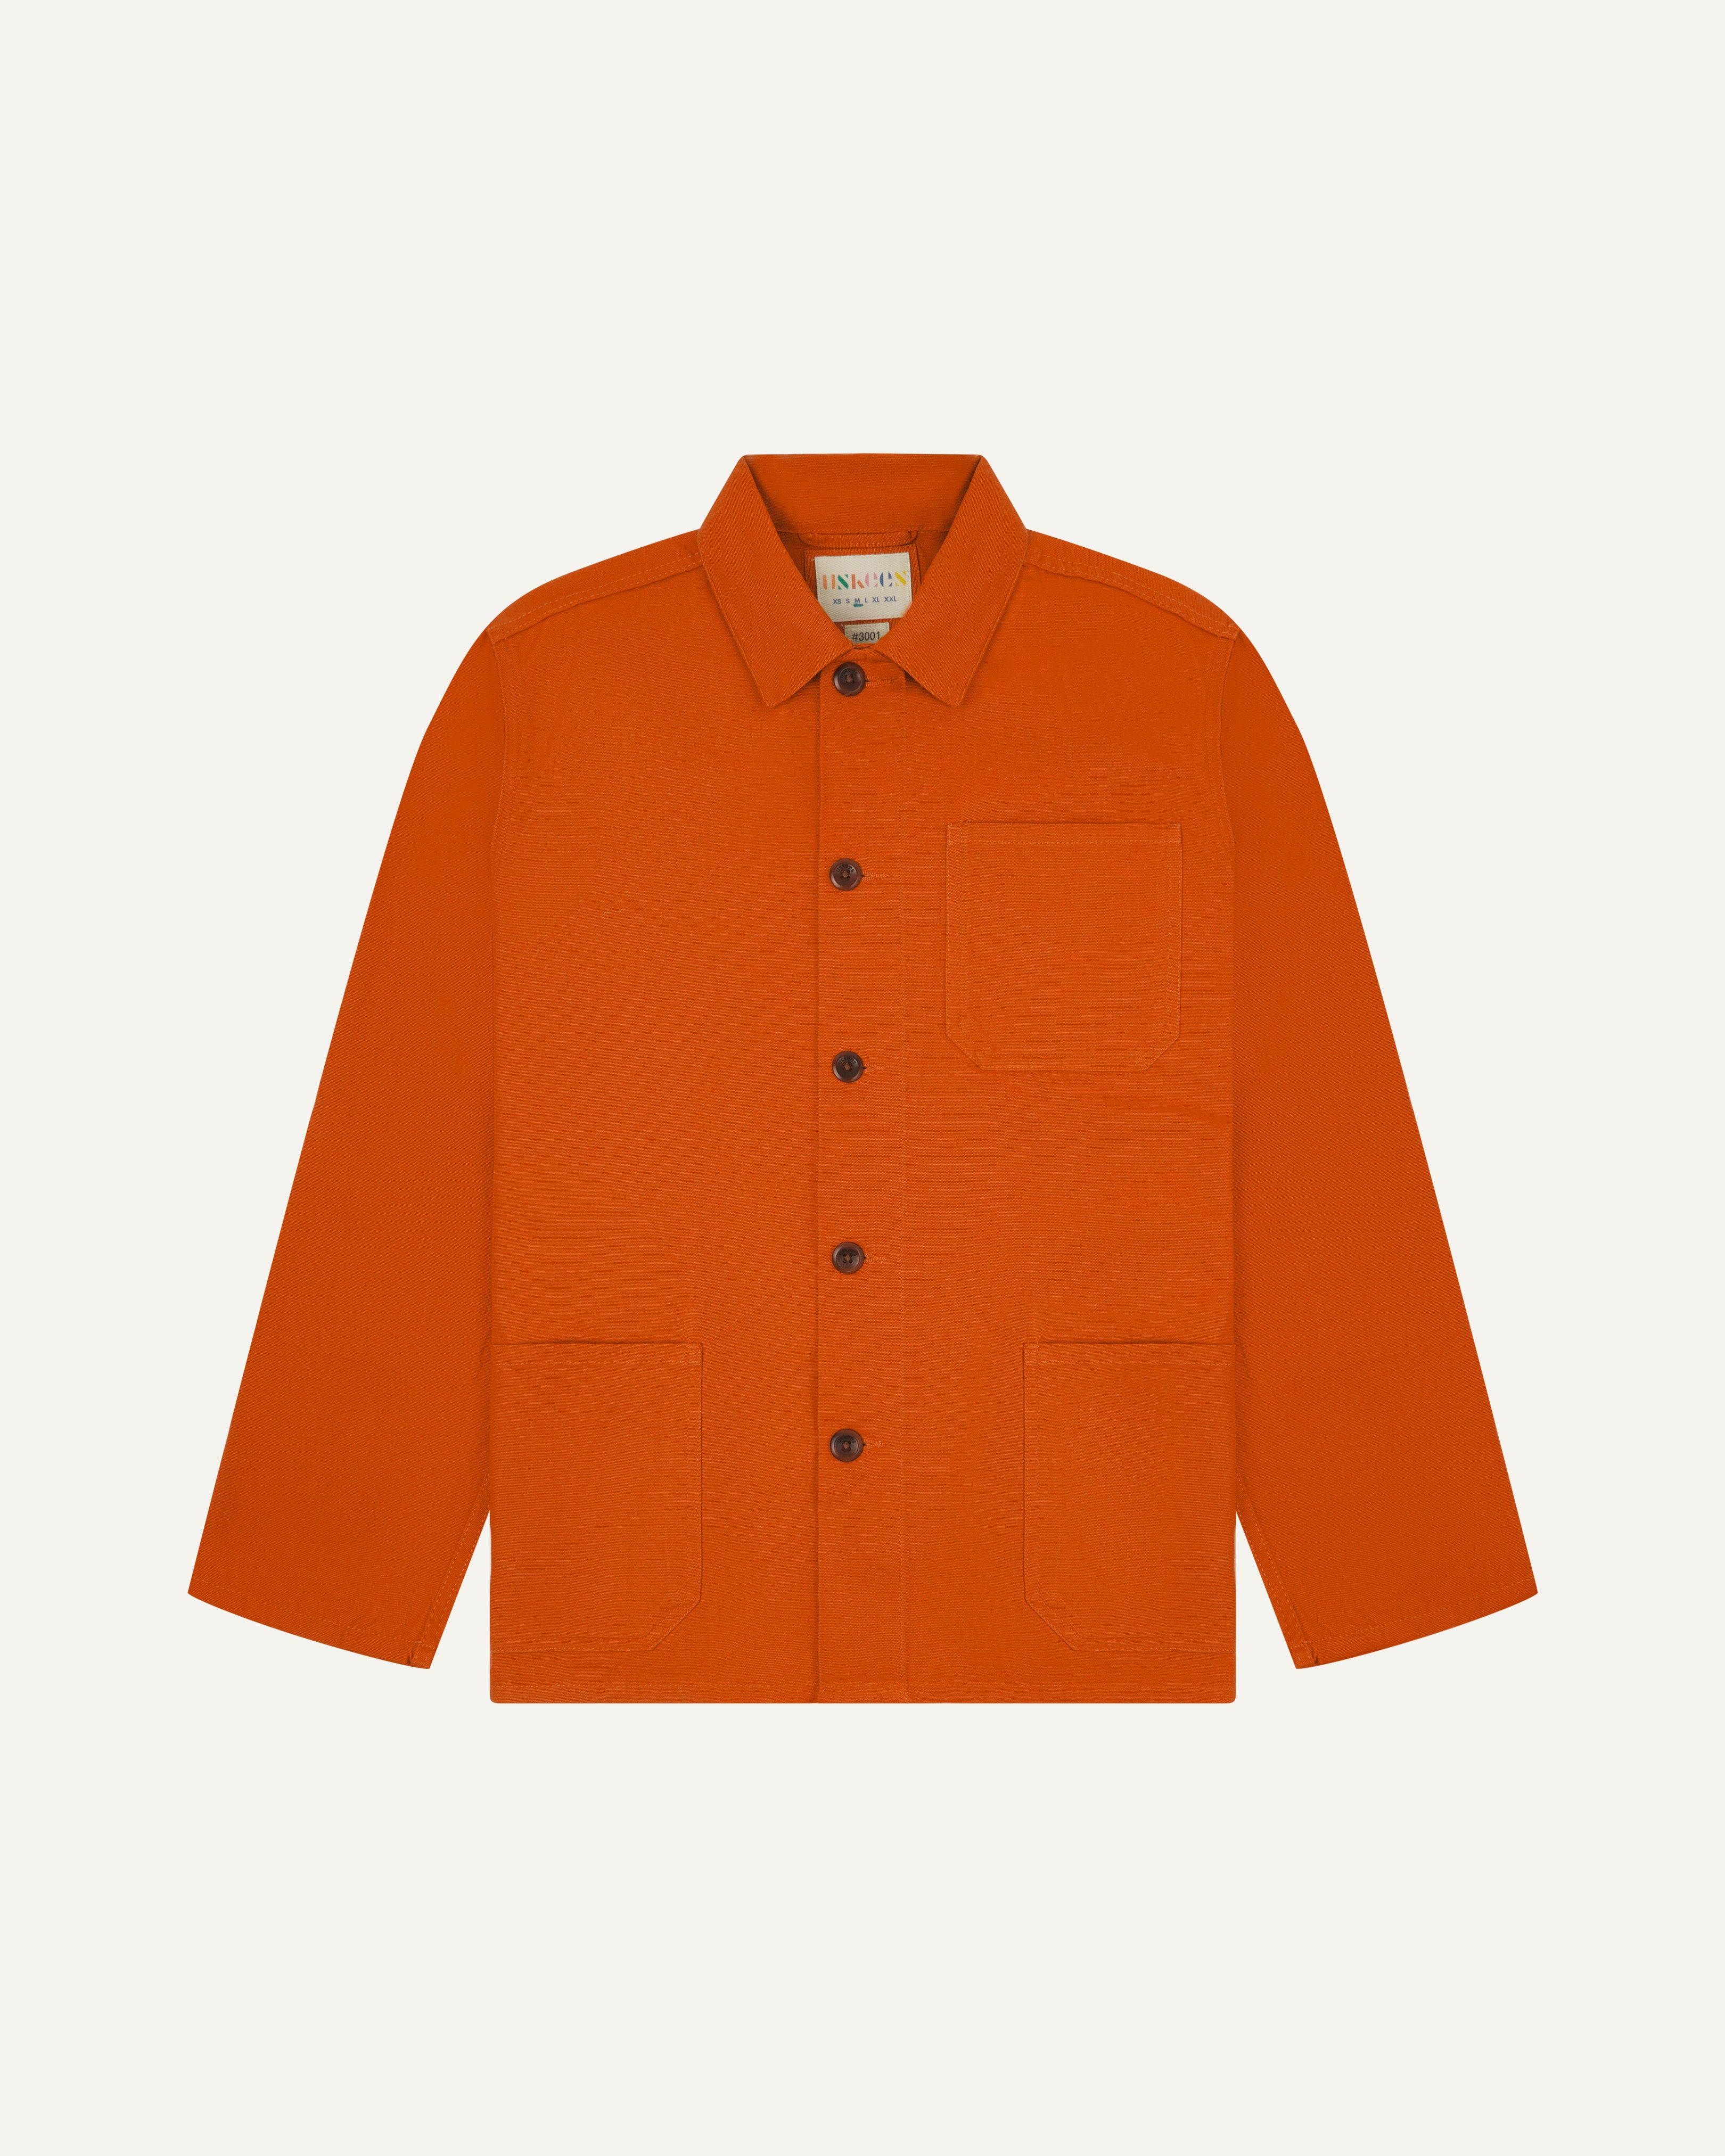 Front flat shot of an uskees orange men's overshirt showing contrast brown corozo buttons and brand label at neck.